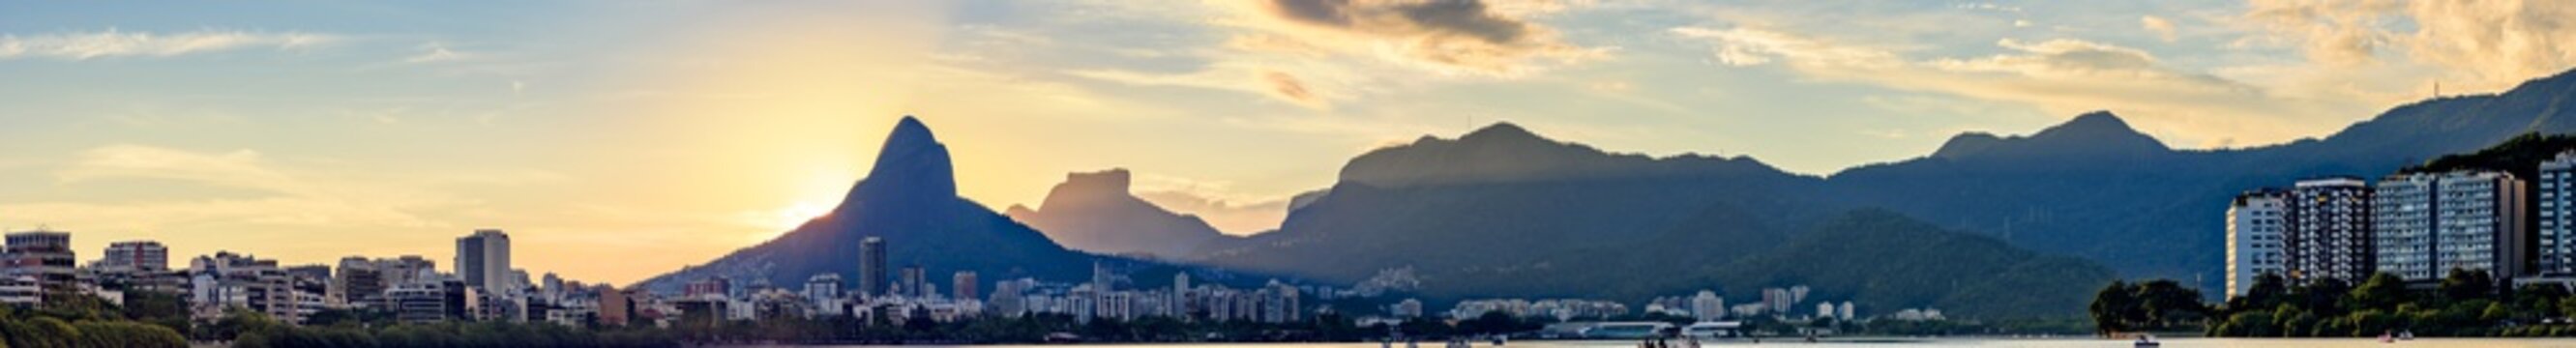 Panoramic image of the first summer sunset of the year 2018 seen from the lagoon Rodrigo de Freitas with the buildings of the city of Rio de Janeiro, hill Dois IrmÃ£os and Gavea stone